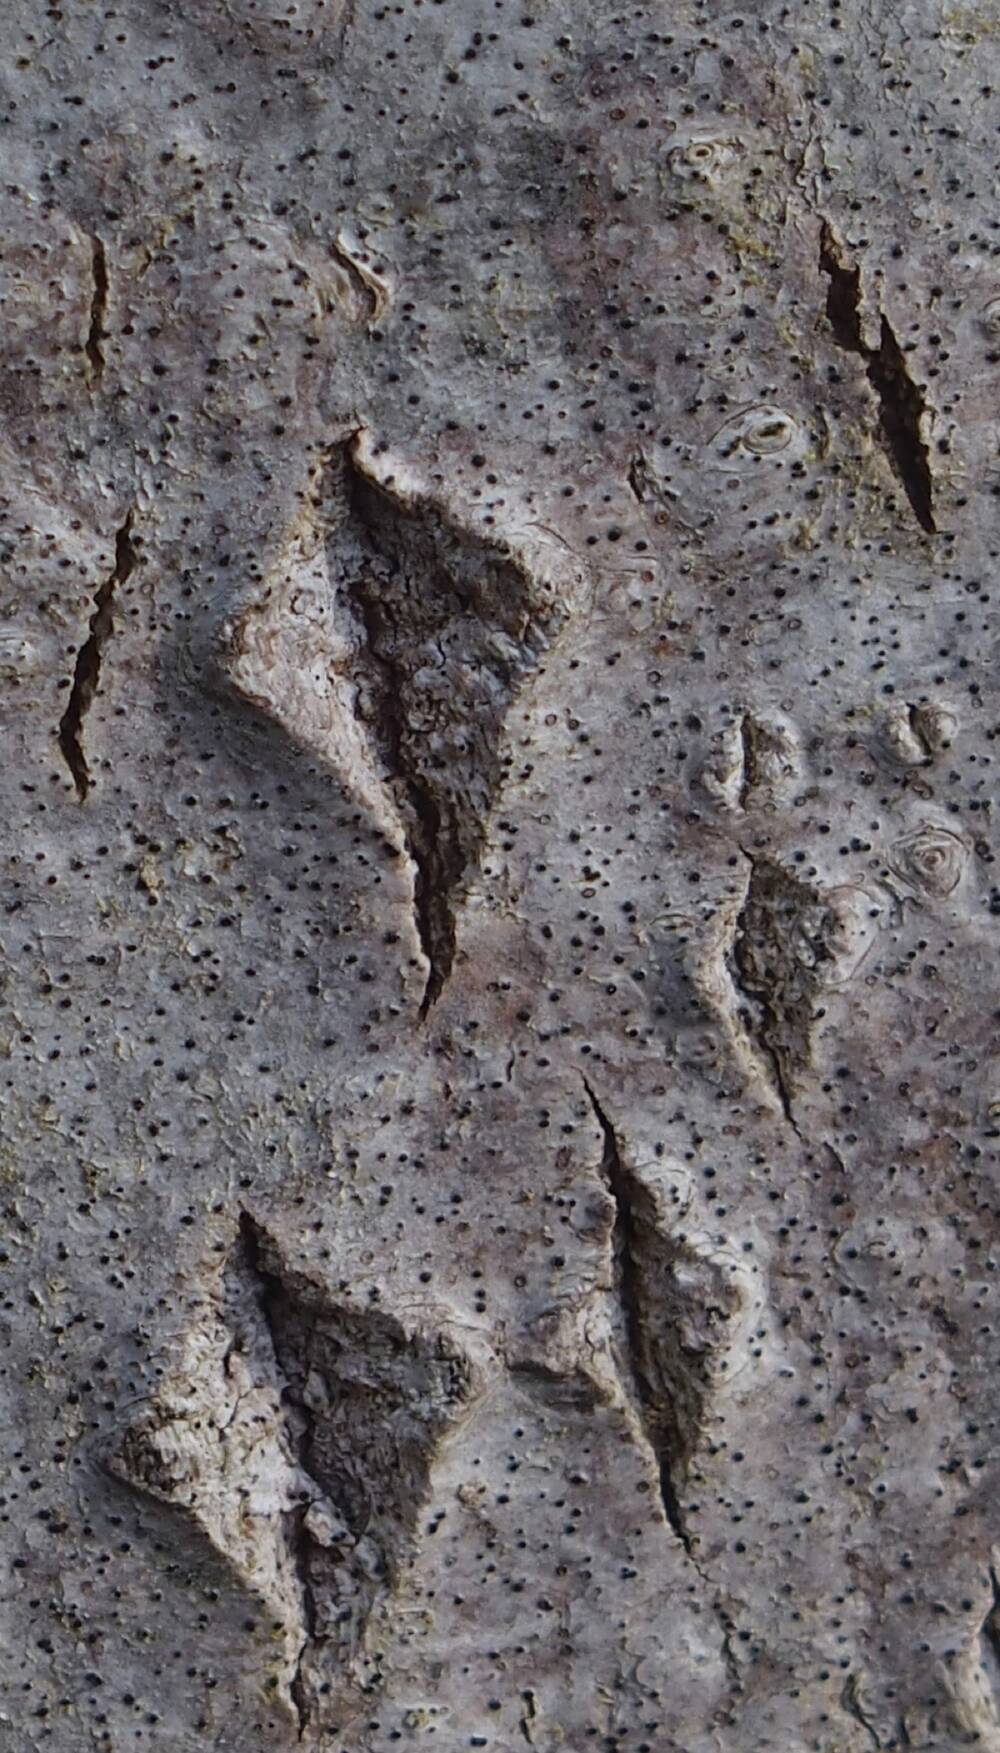 A close-up photo of a section of aspen bark, which has diamond-shaped markings on its speckled, silvery grey trunk.